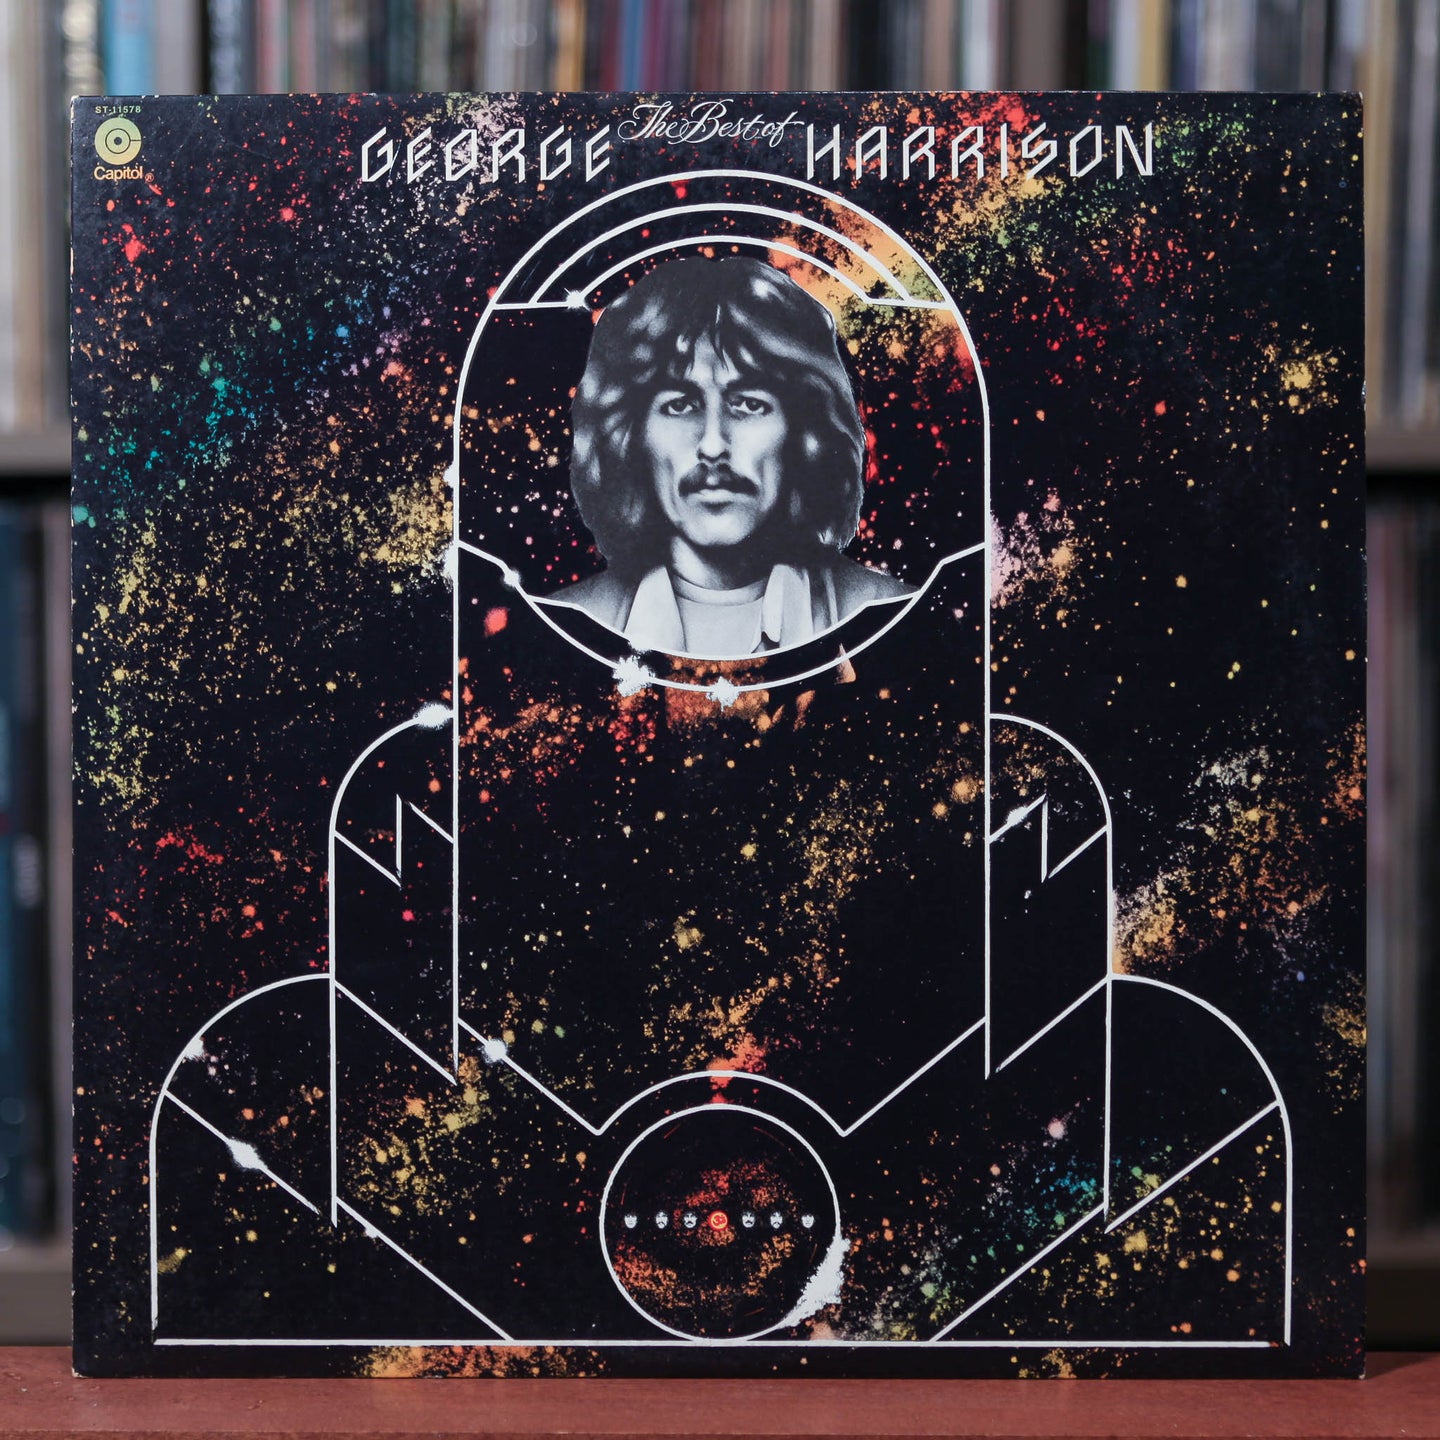 George Harrison - The Best Of George Harrison - 1976 Capitol, EX/EX